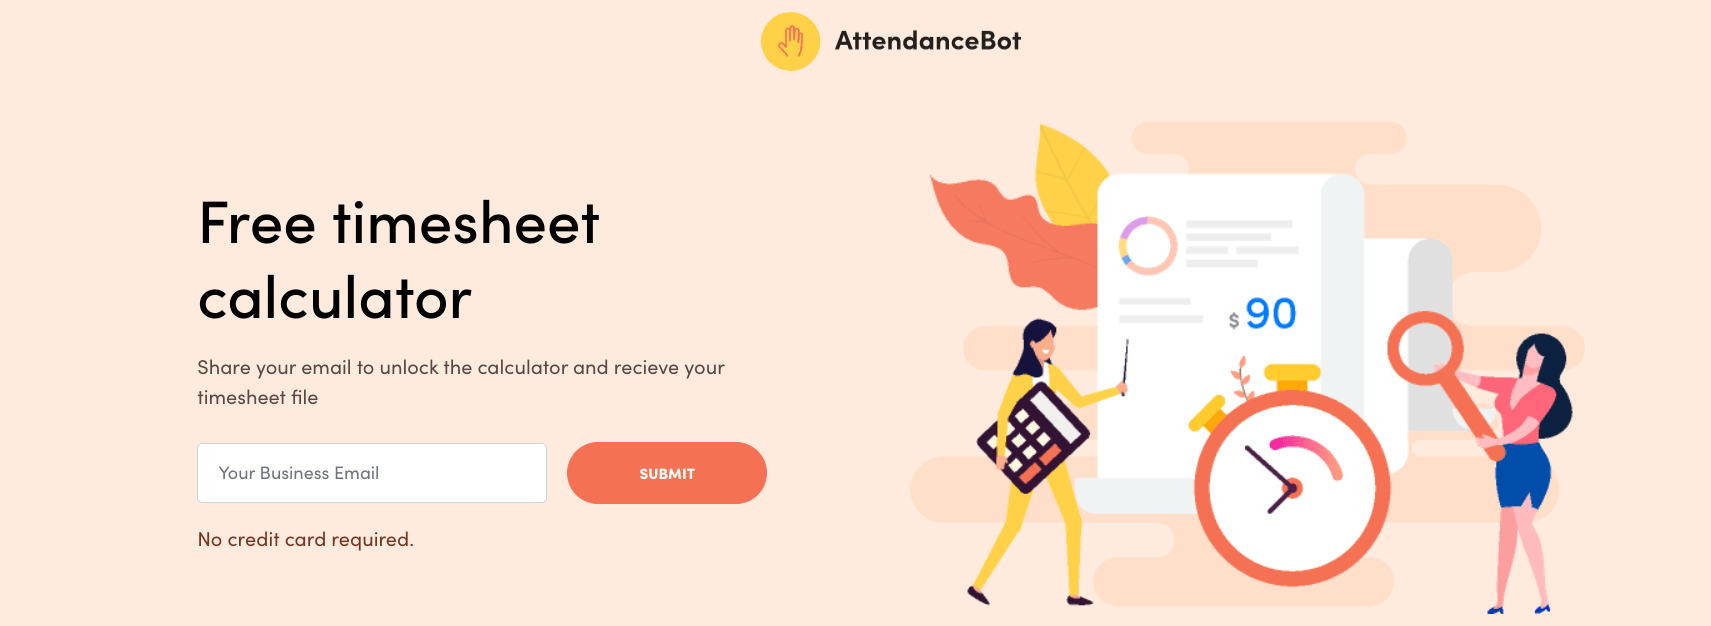 Timesheets with AttendanceBot